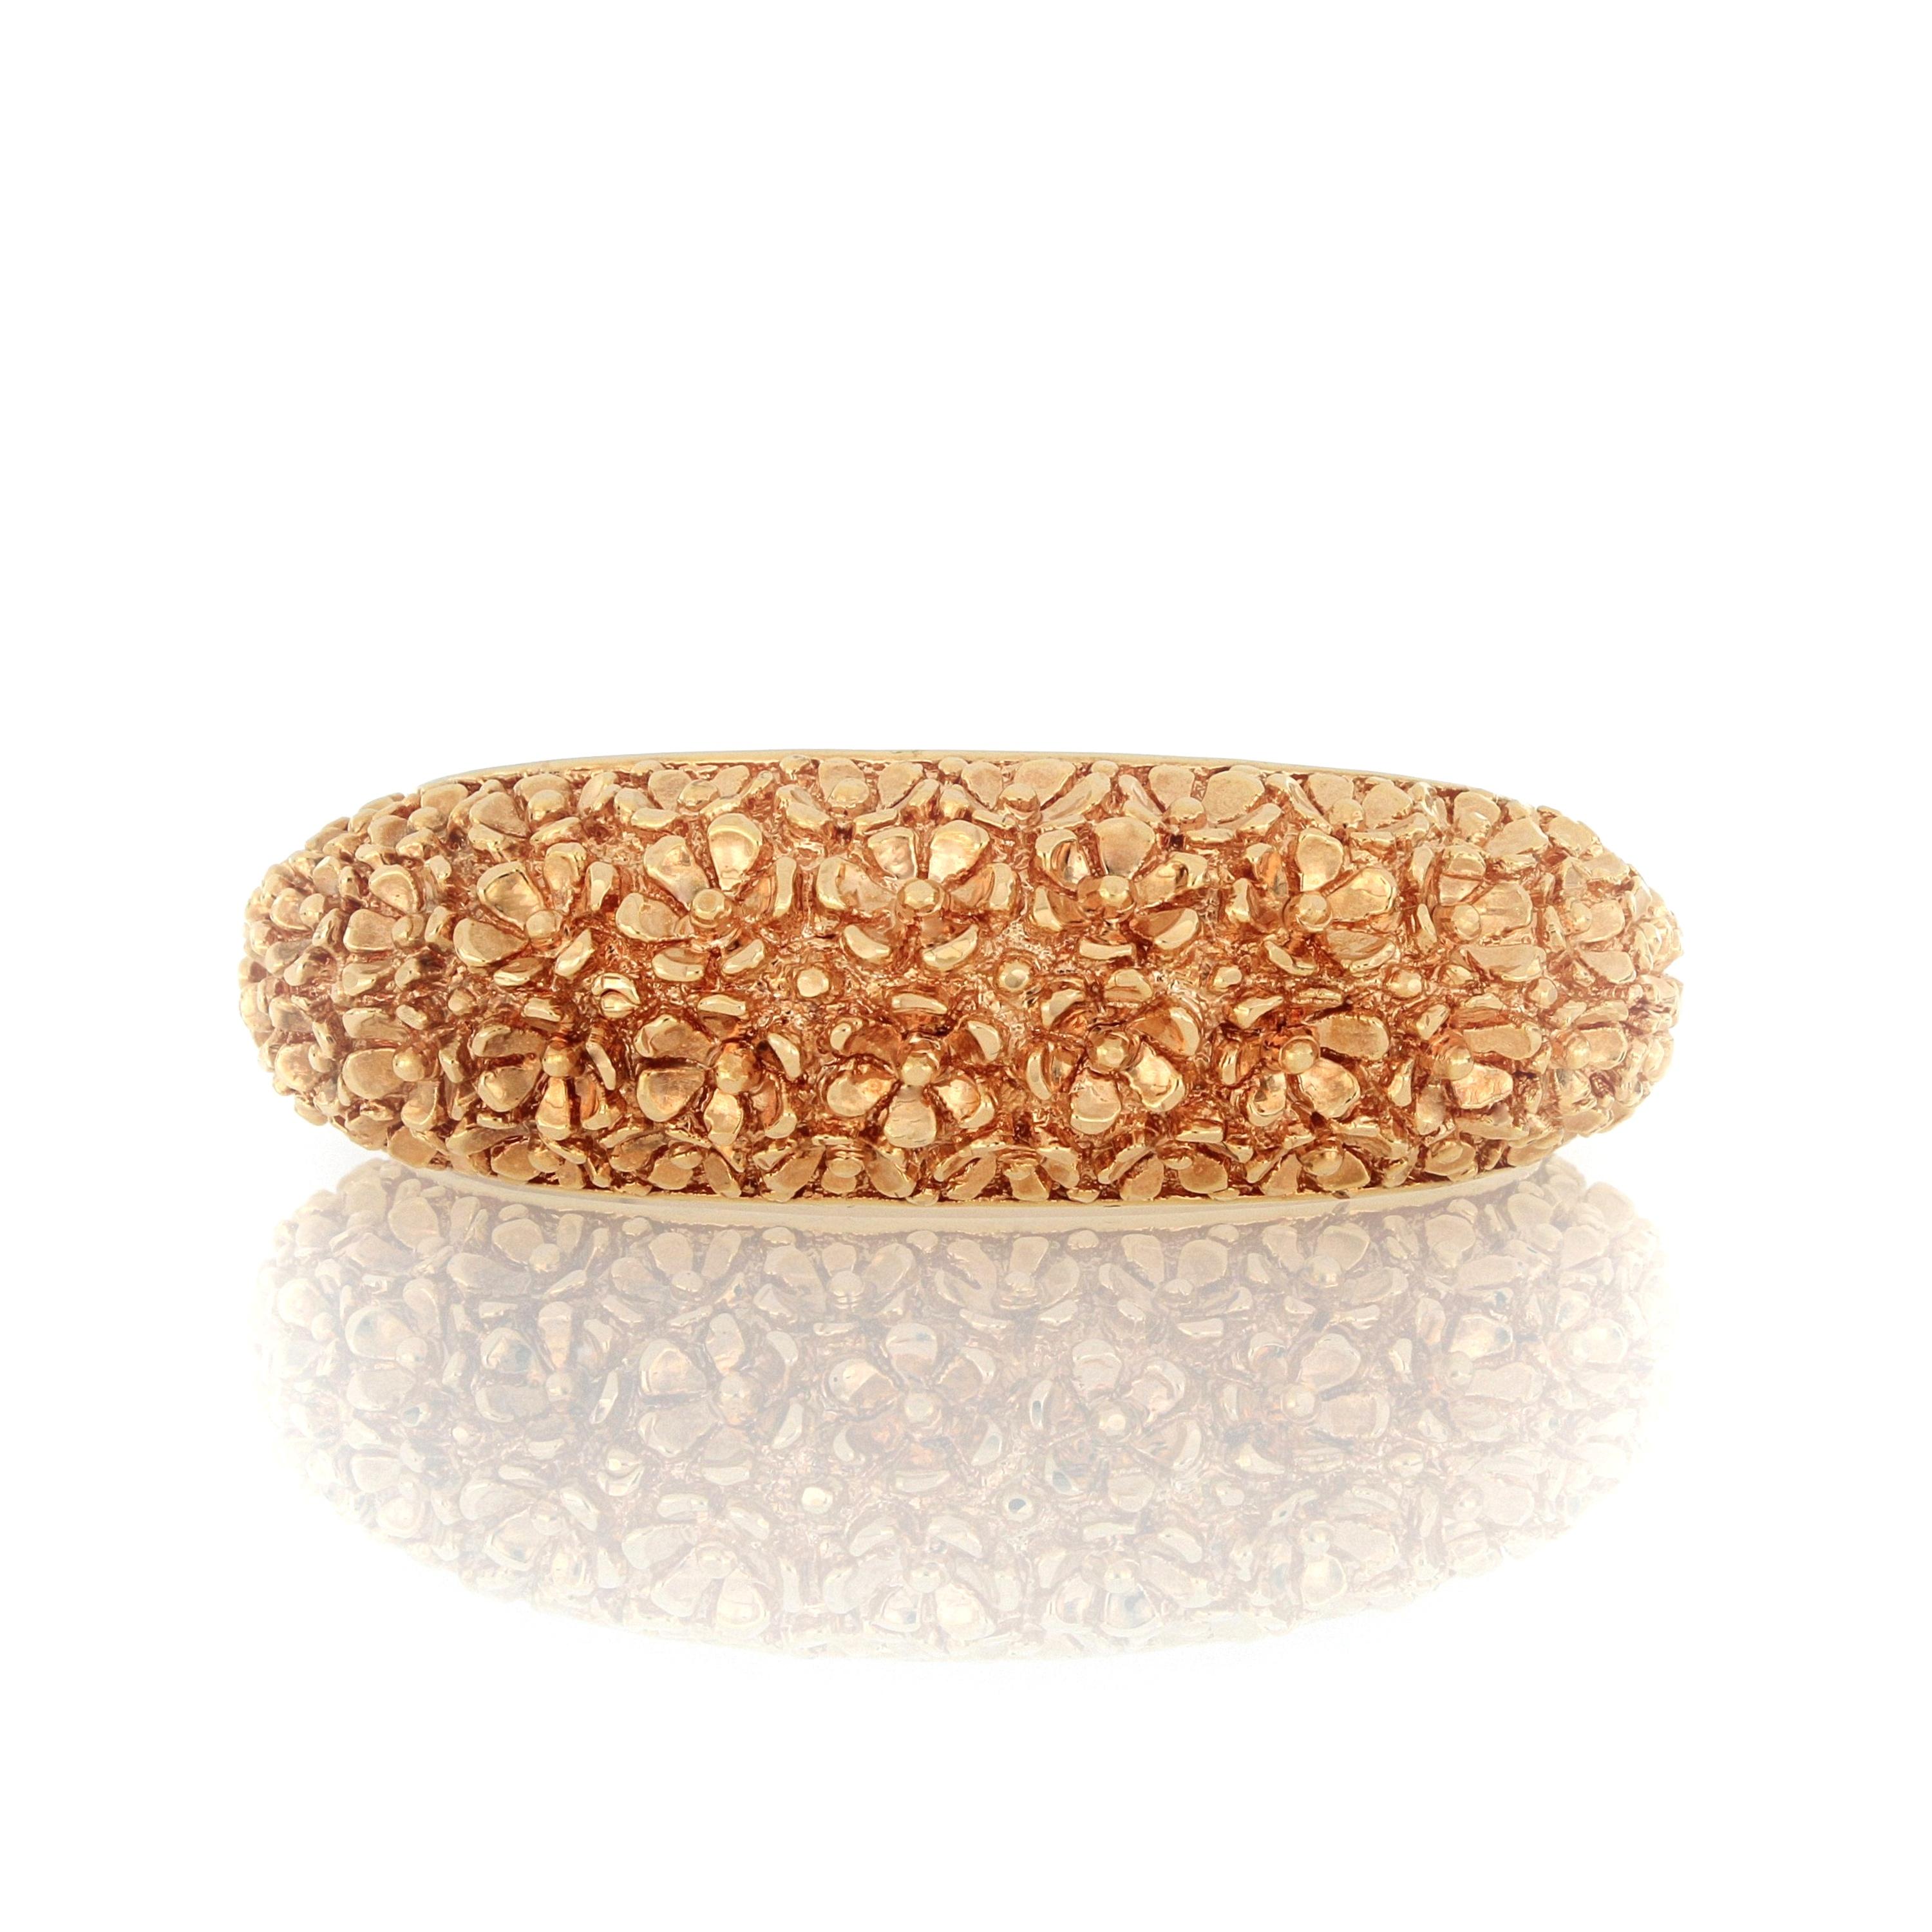 18 Karat Rose Gold Bangle, Italian made with fabulous craftsmanship, very unique, stylish and elegant.
O’Che 1867 was founded one and a half centuries ago in Macau. The brand is renowned for its high jewellery collections with fabulous designs. Our